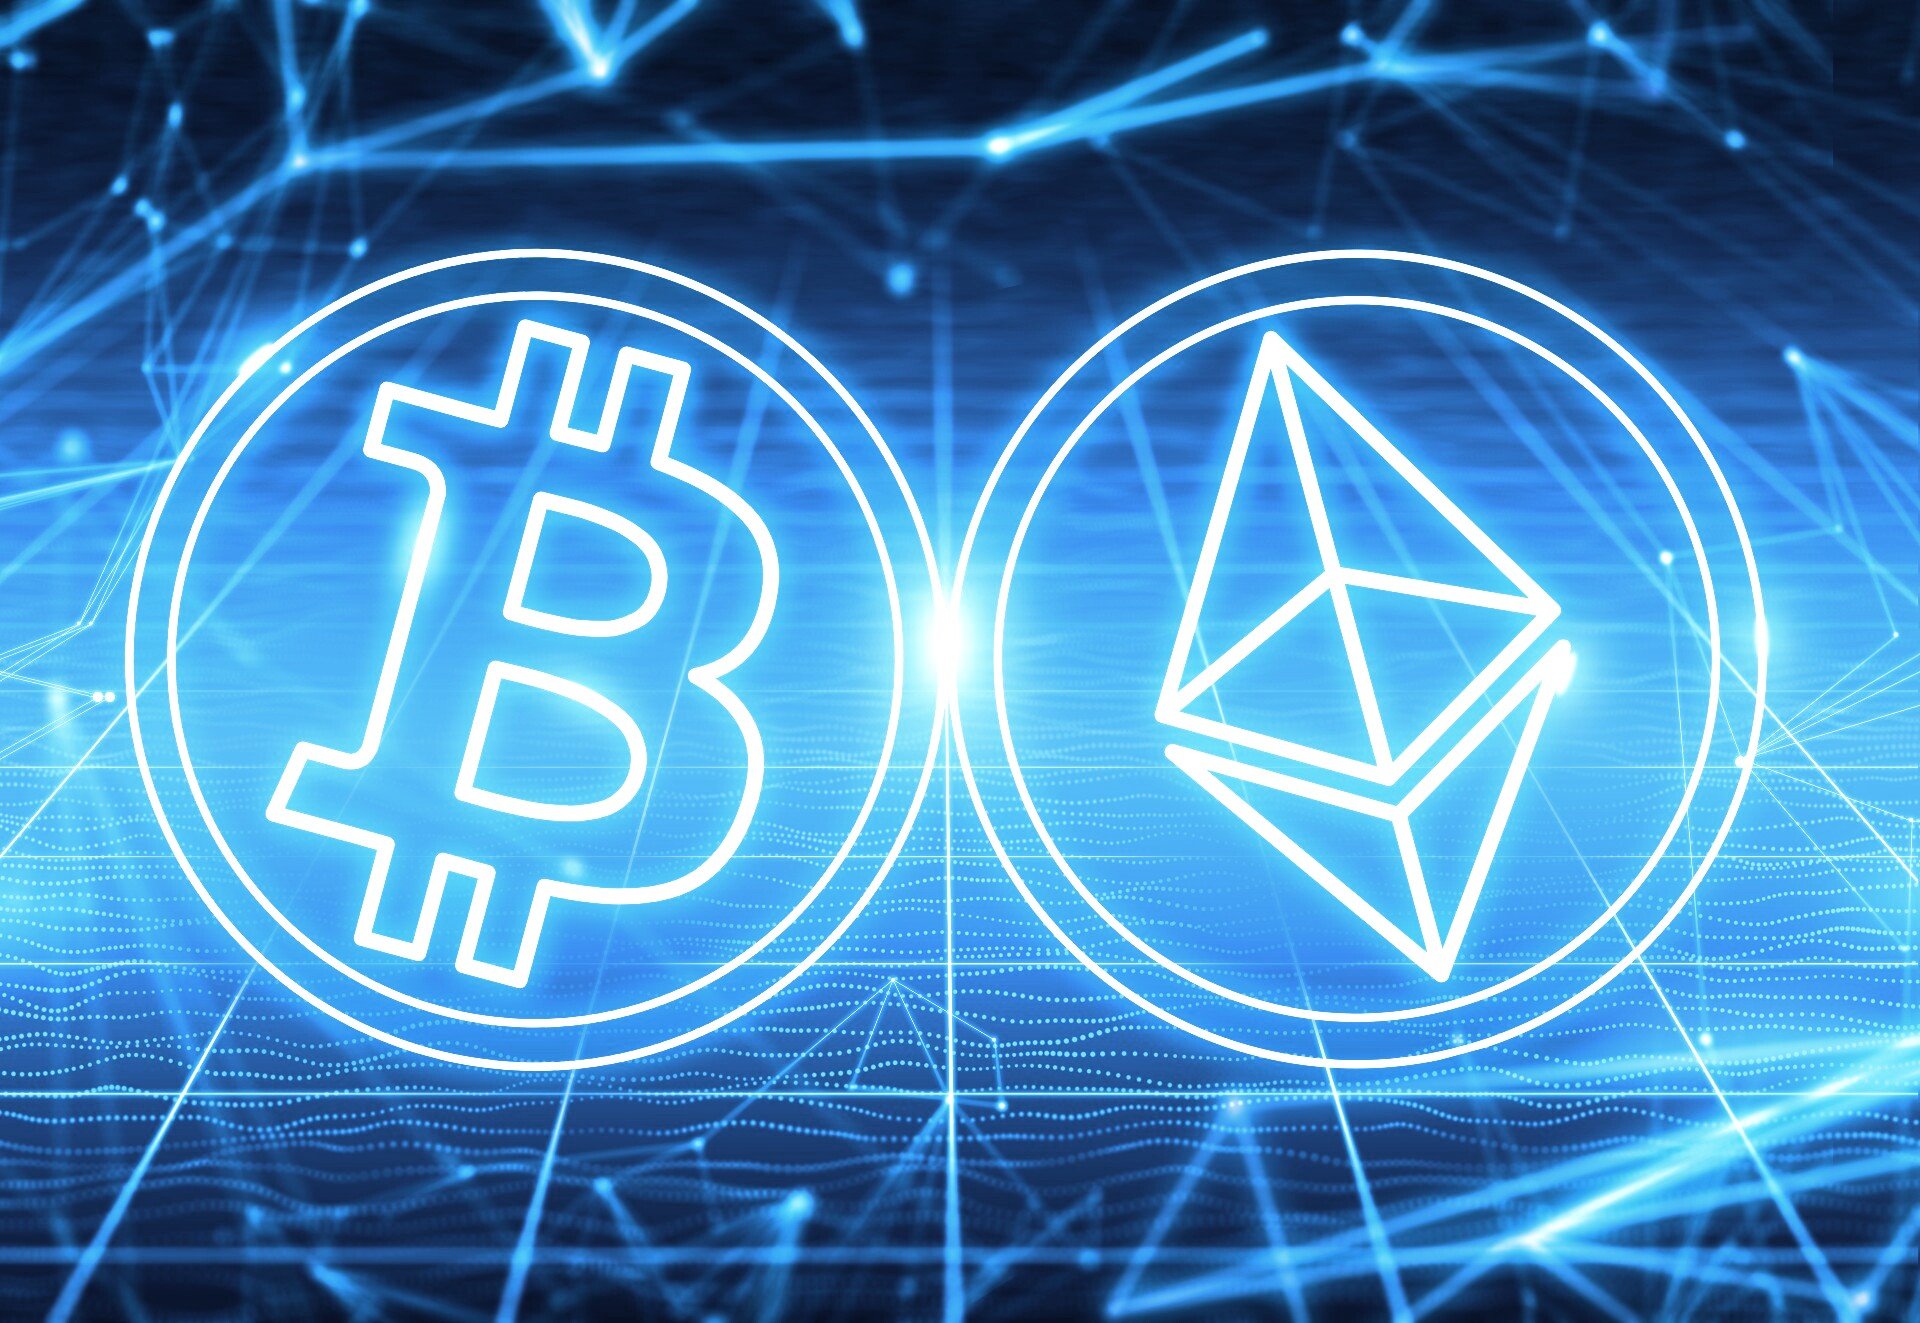 Bitcoin and Ethereum Down Over 50% From All-Time Highs